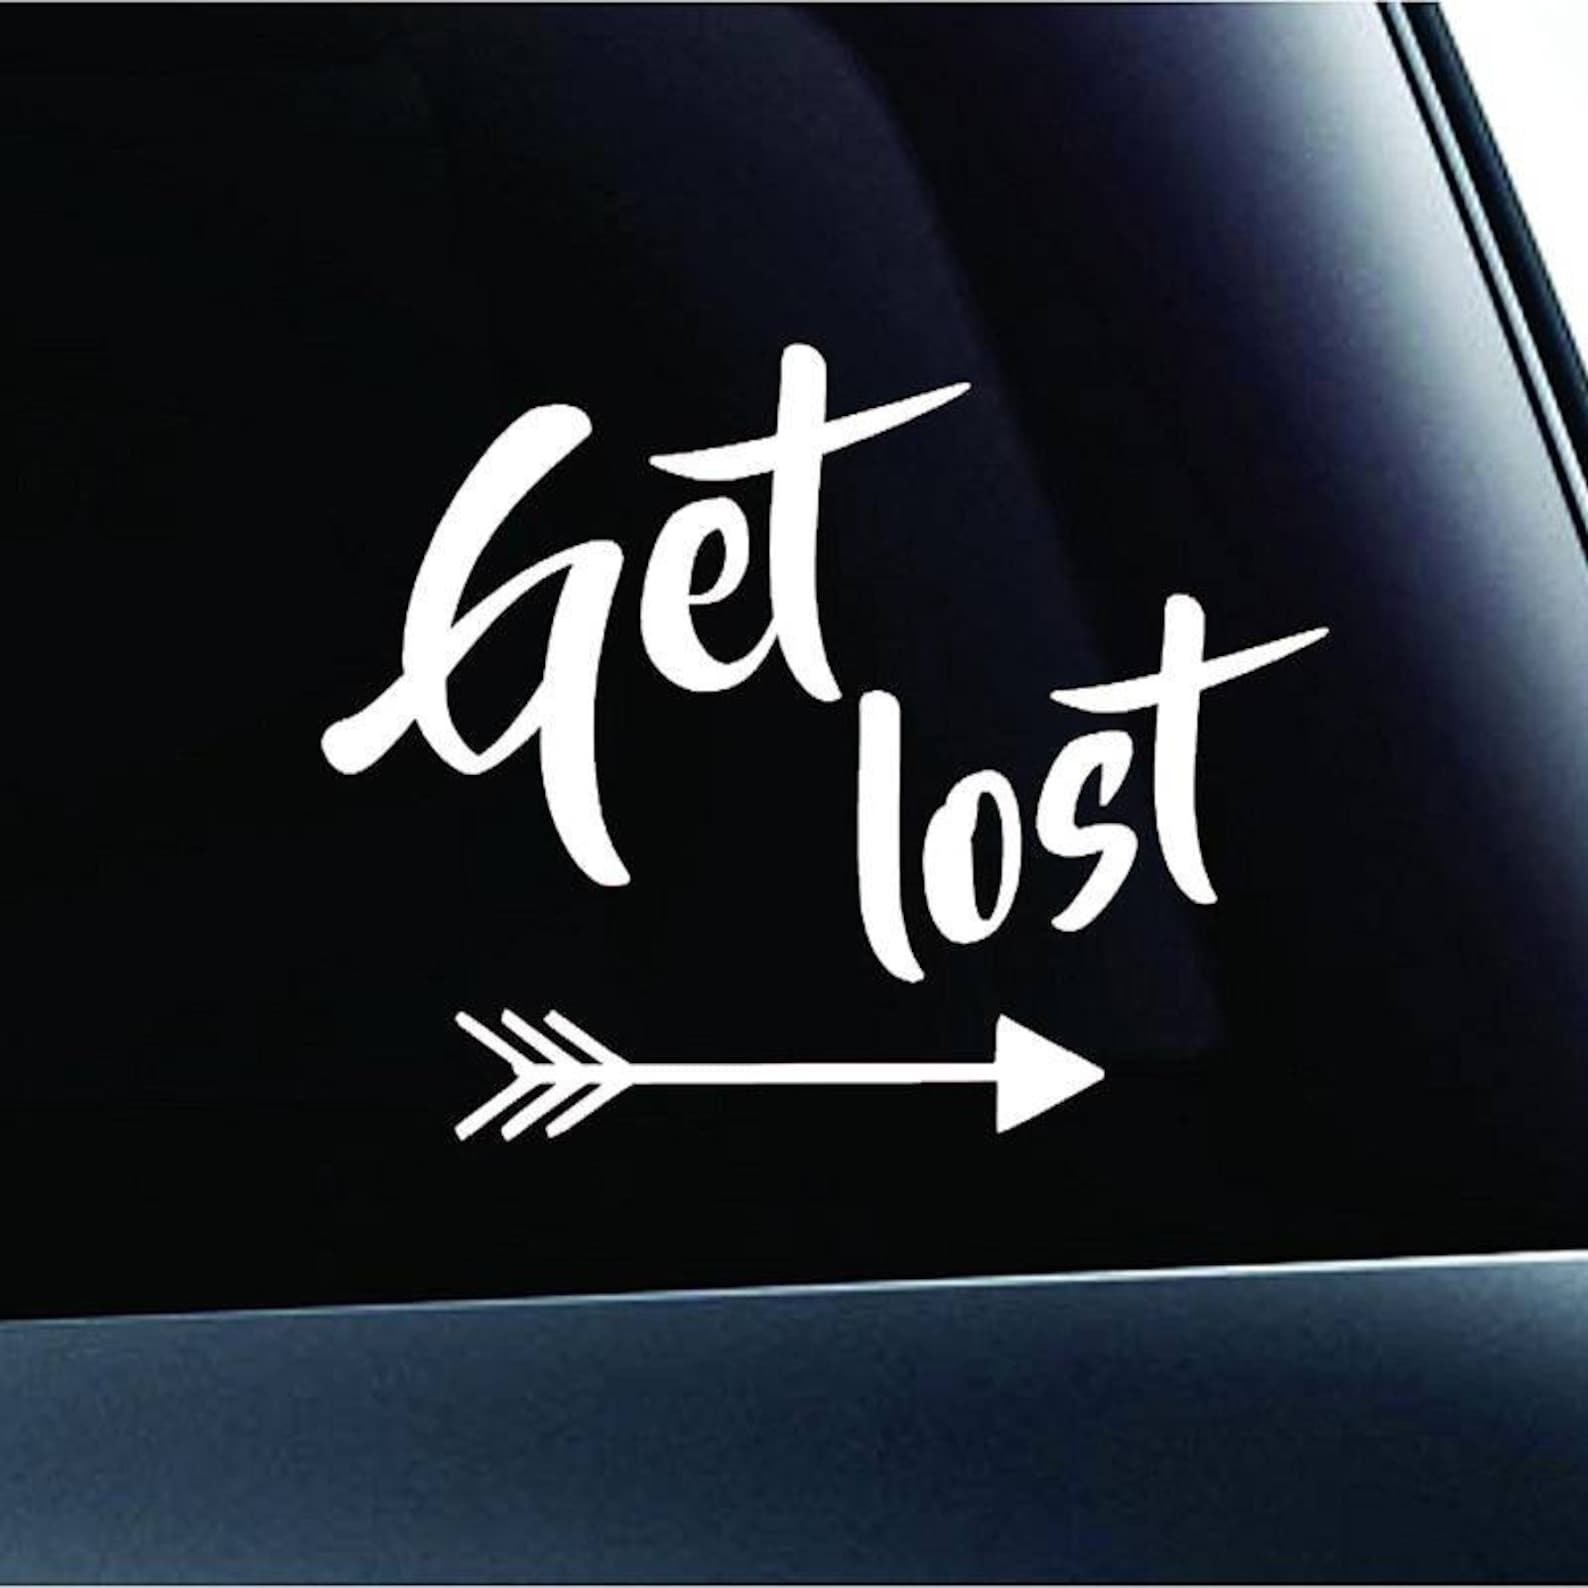 Let S Get Lost Quote. Vector Illustration Decorative Design Stock Vector - Illustration of lost ...